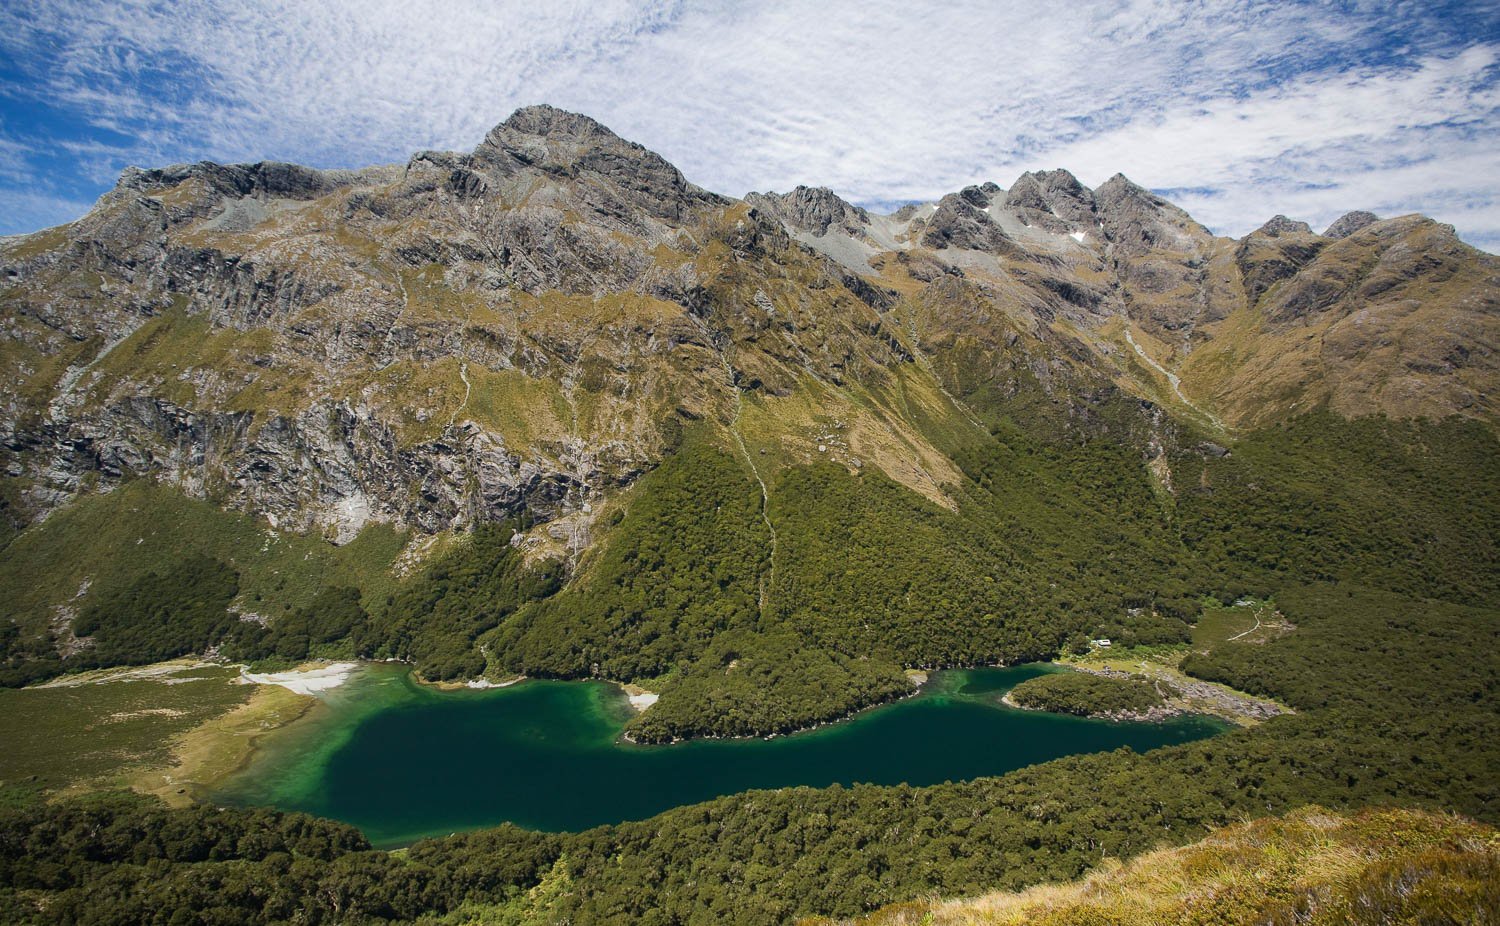 Giant green mountains with a small lake below, Lake MacKenzie from high above the Routeburn Track - New Zealand